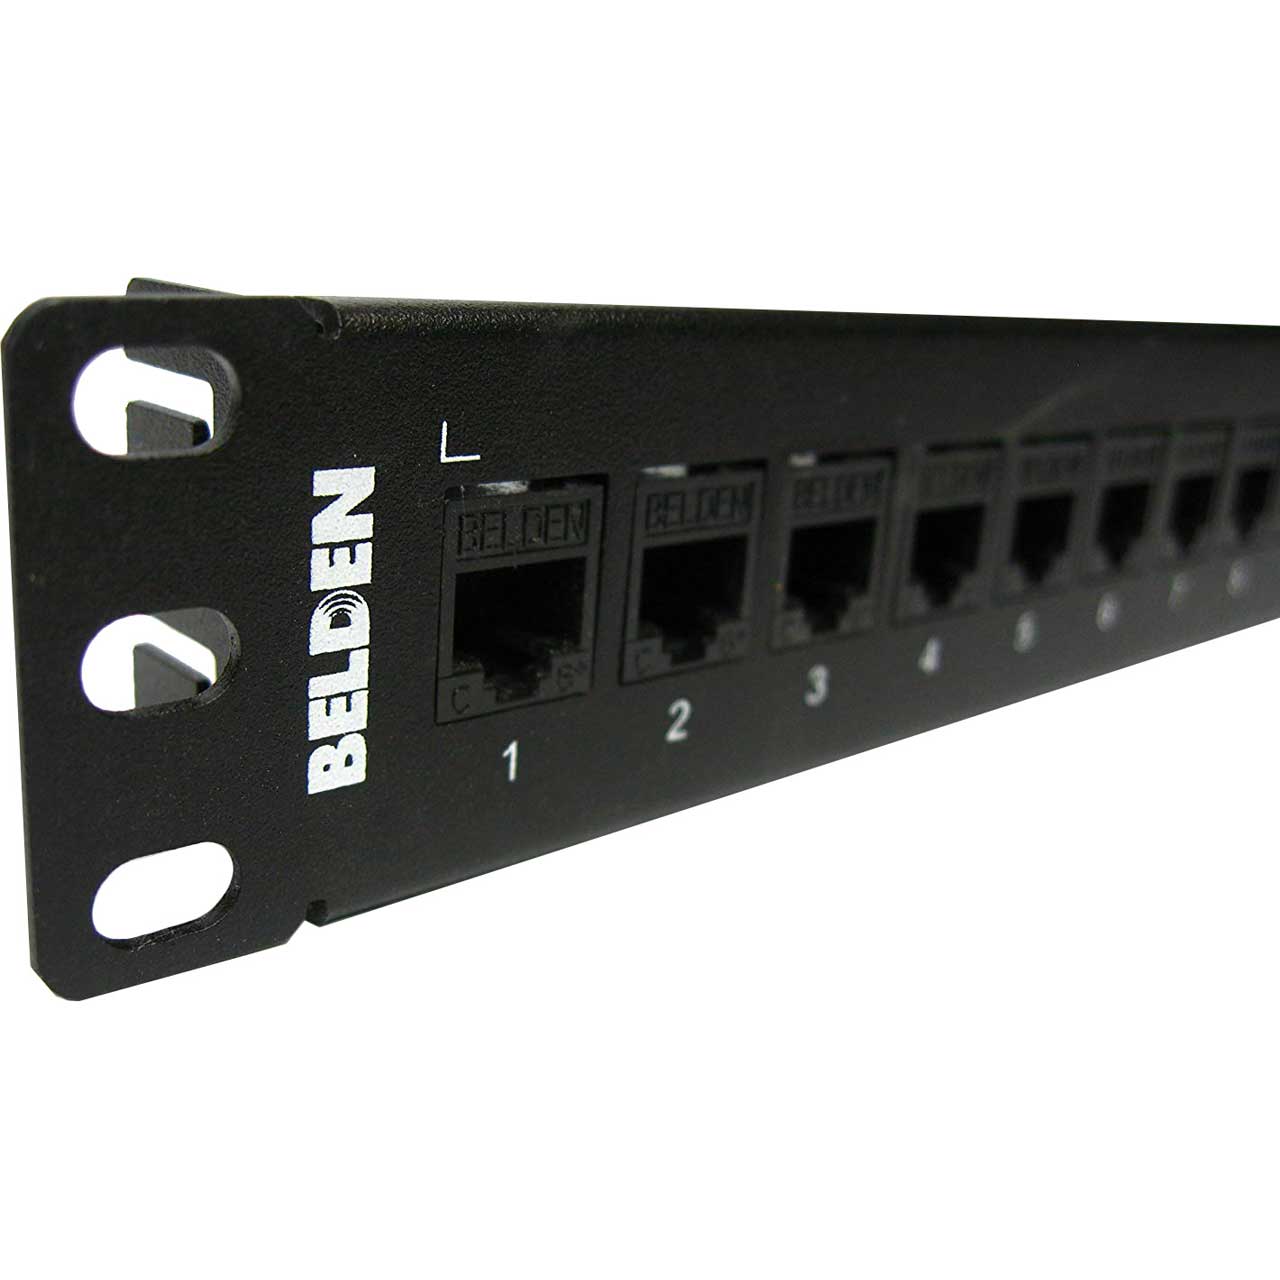 ShoreTel 24 Port Patch Panel with Amphenol Cable